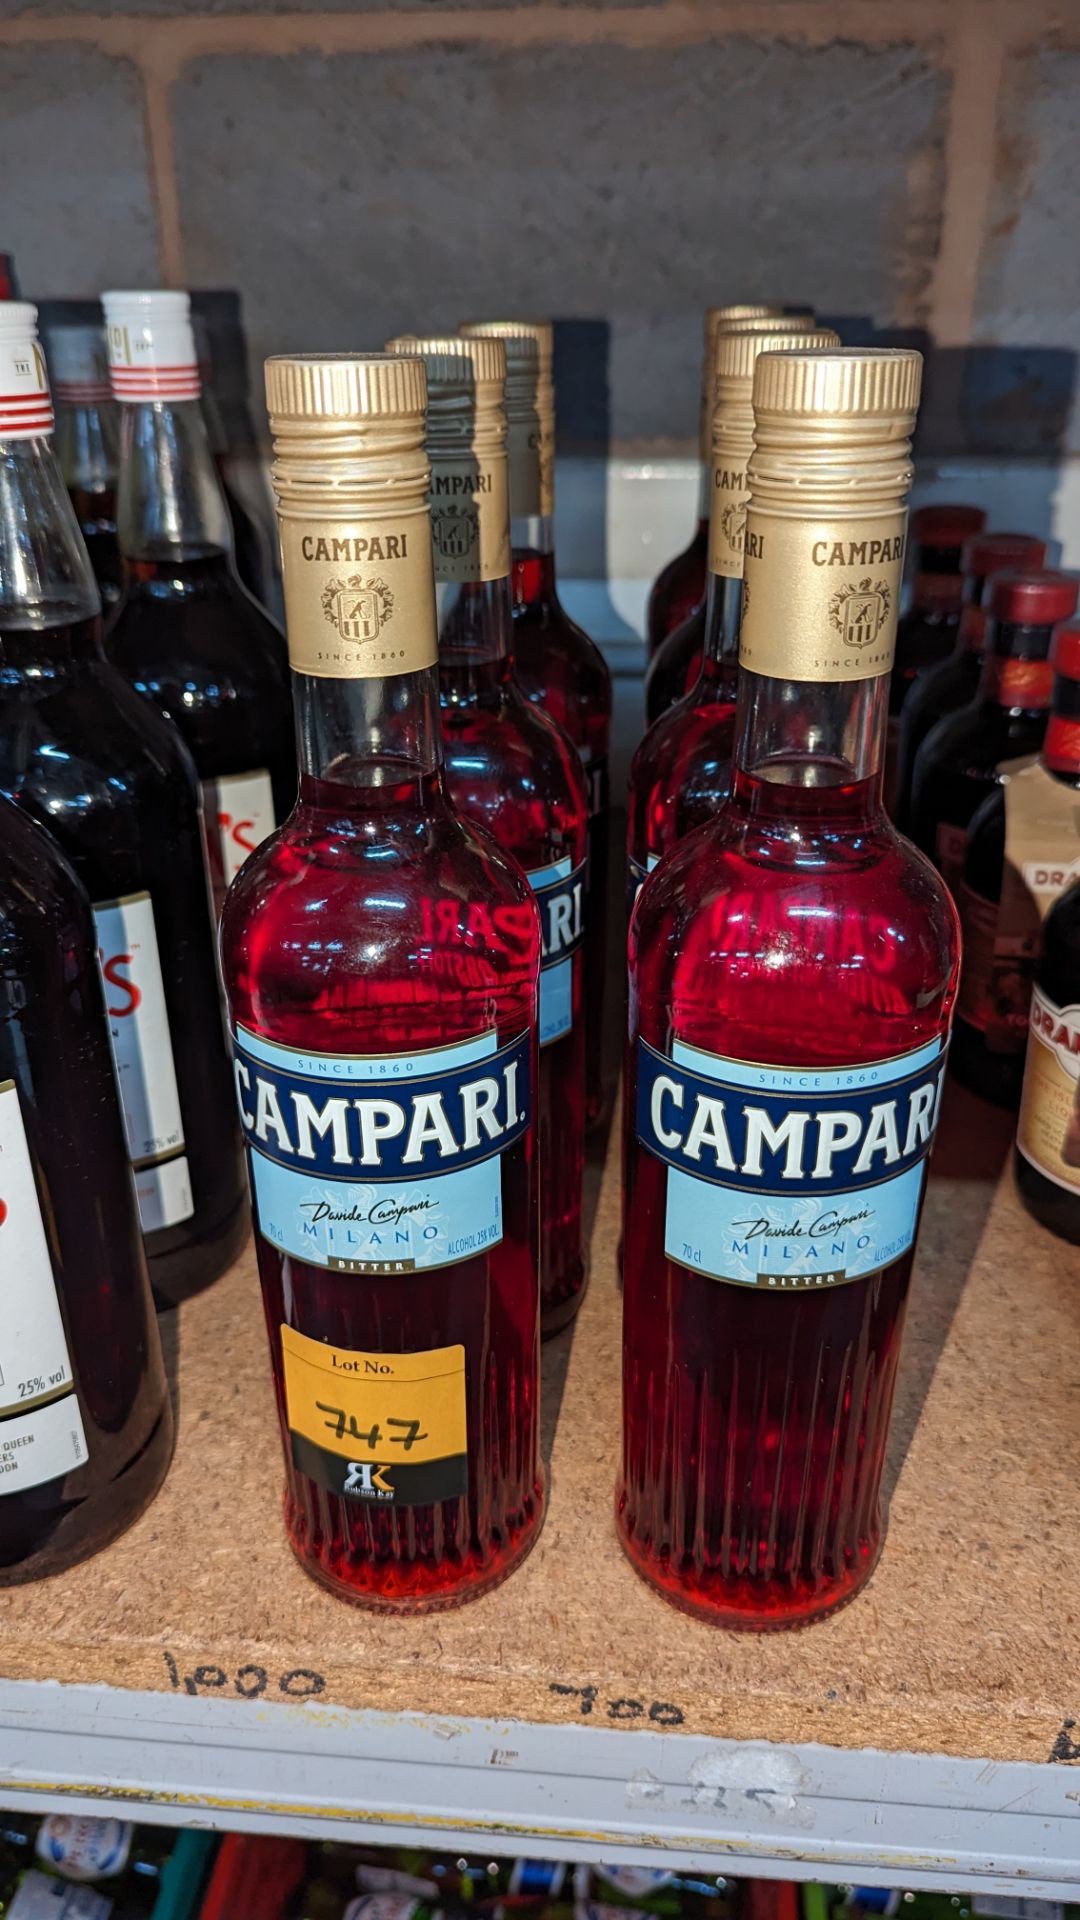 7 bottles of Campari sold under AWRS number XQAW00000101017 - Image 2 of 4